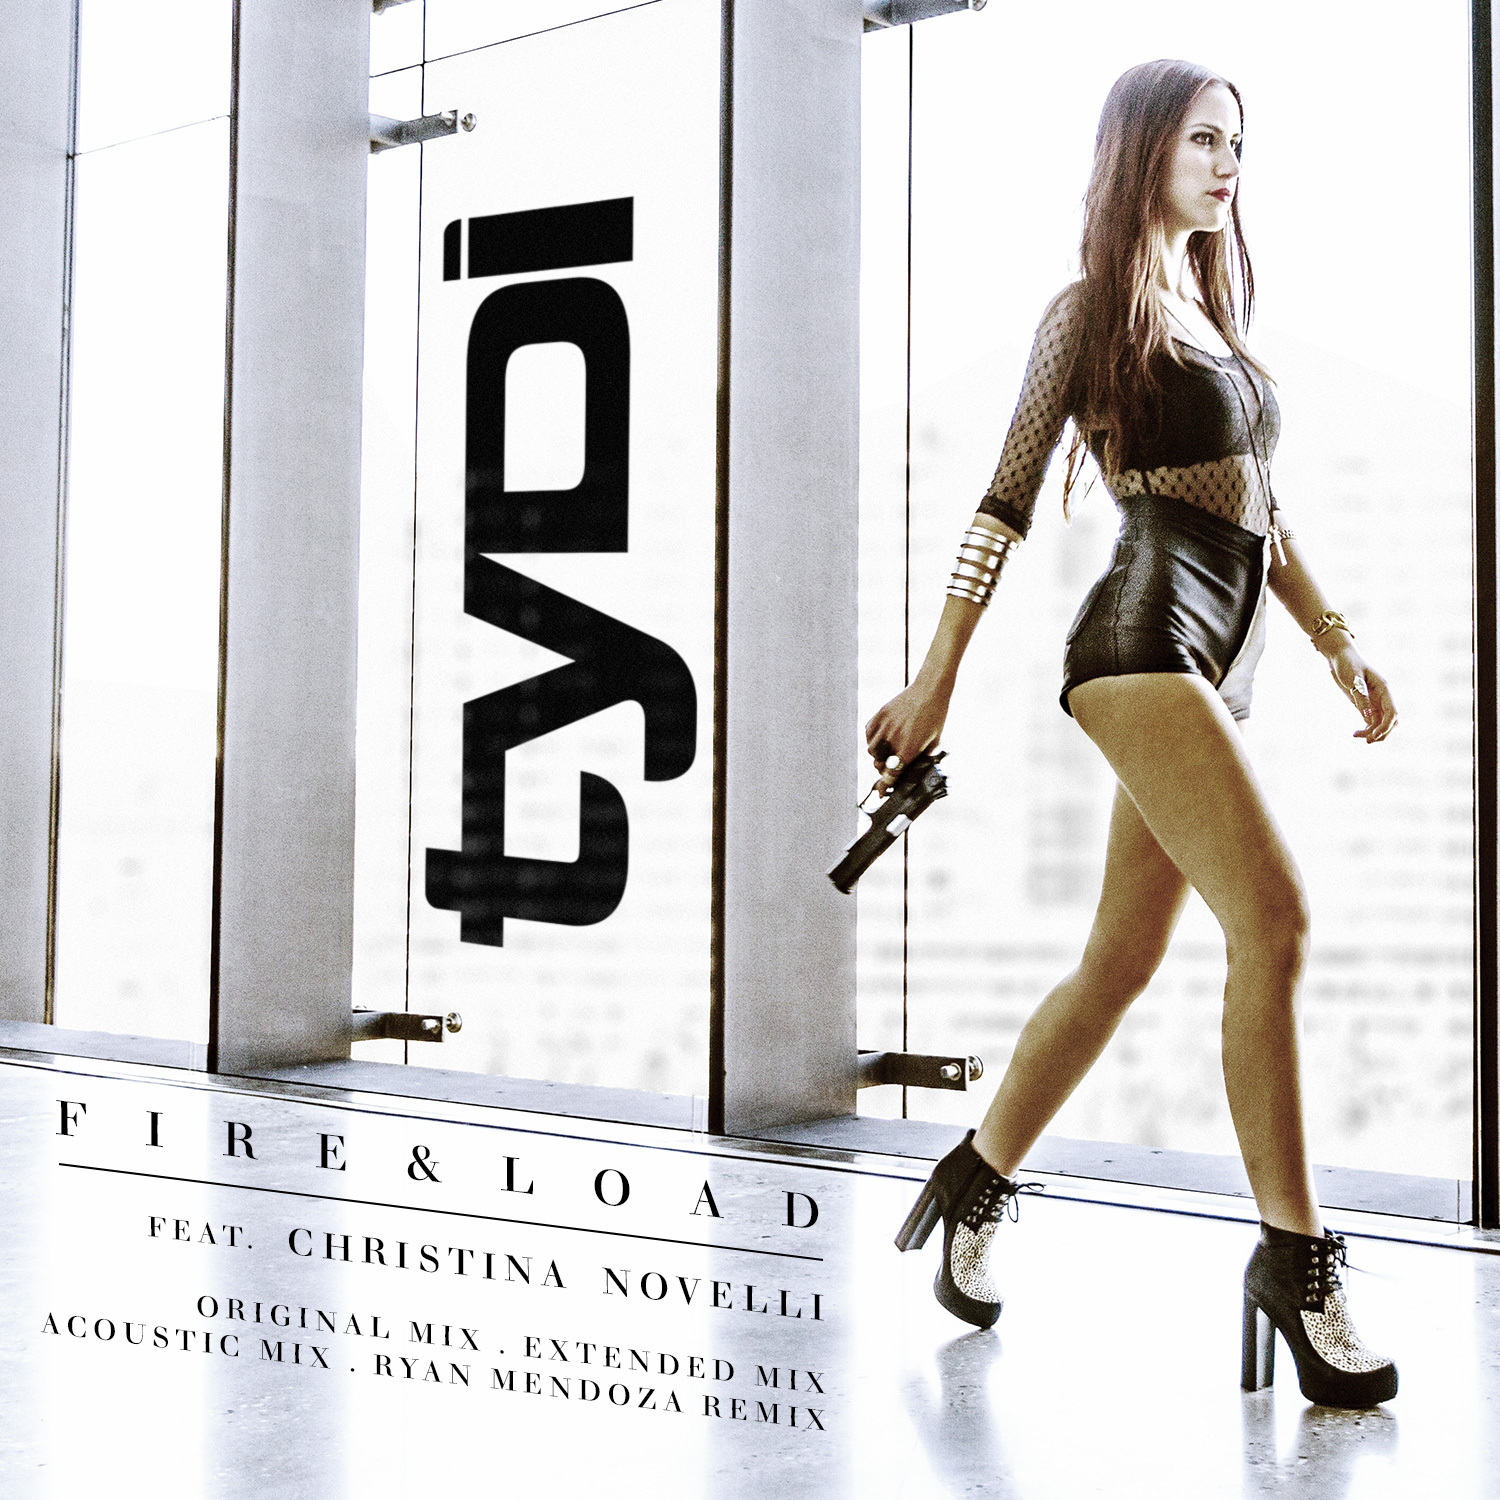 Fire & Load (Extended Mix)